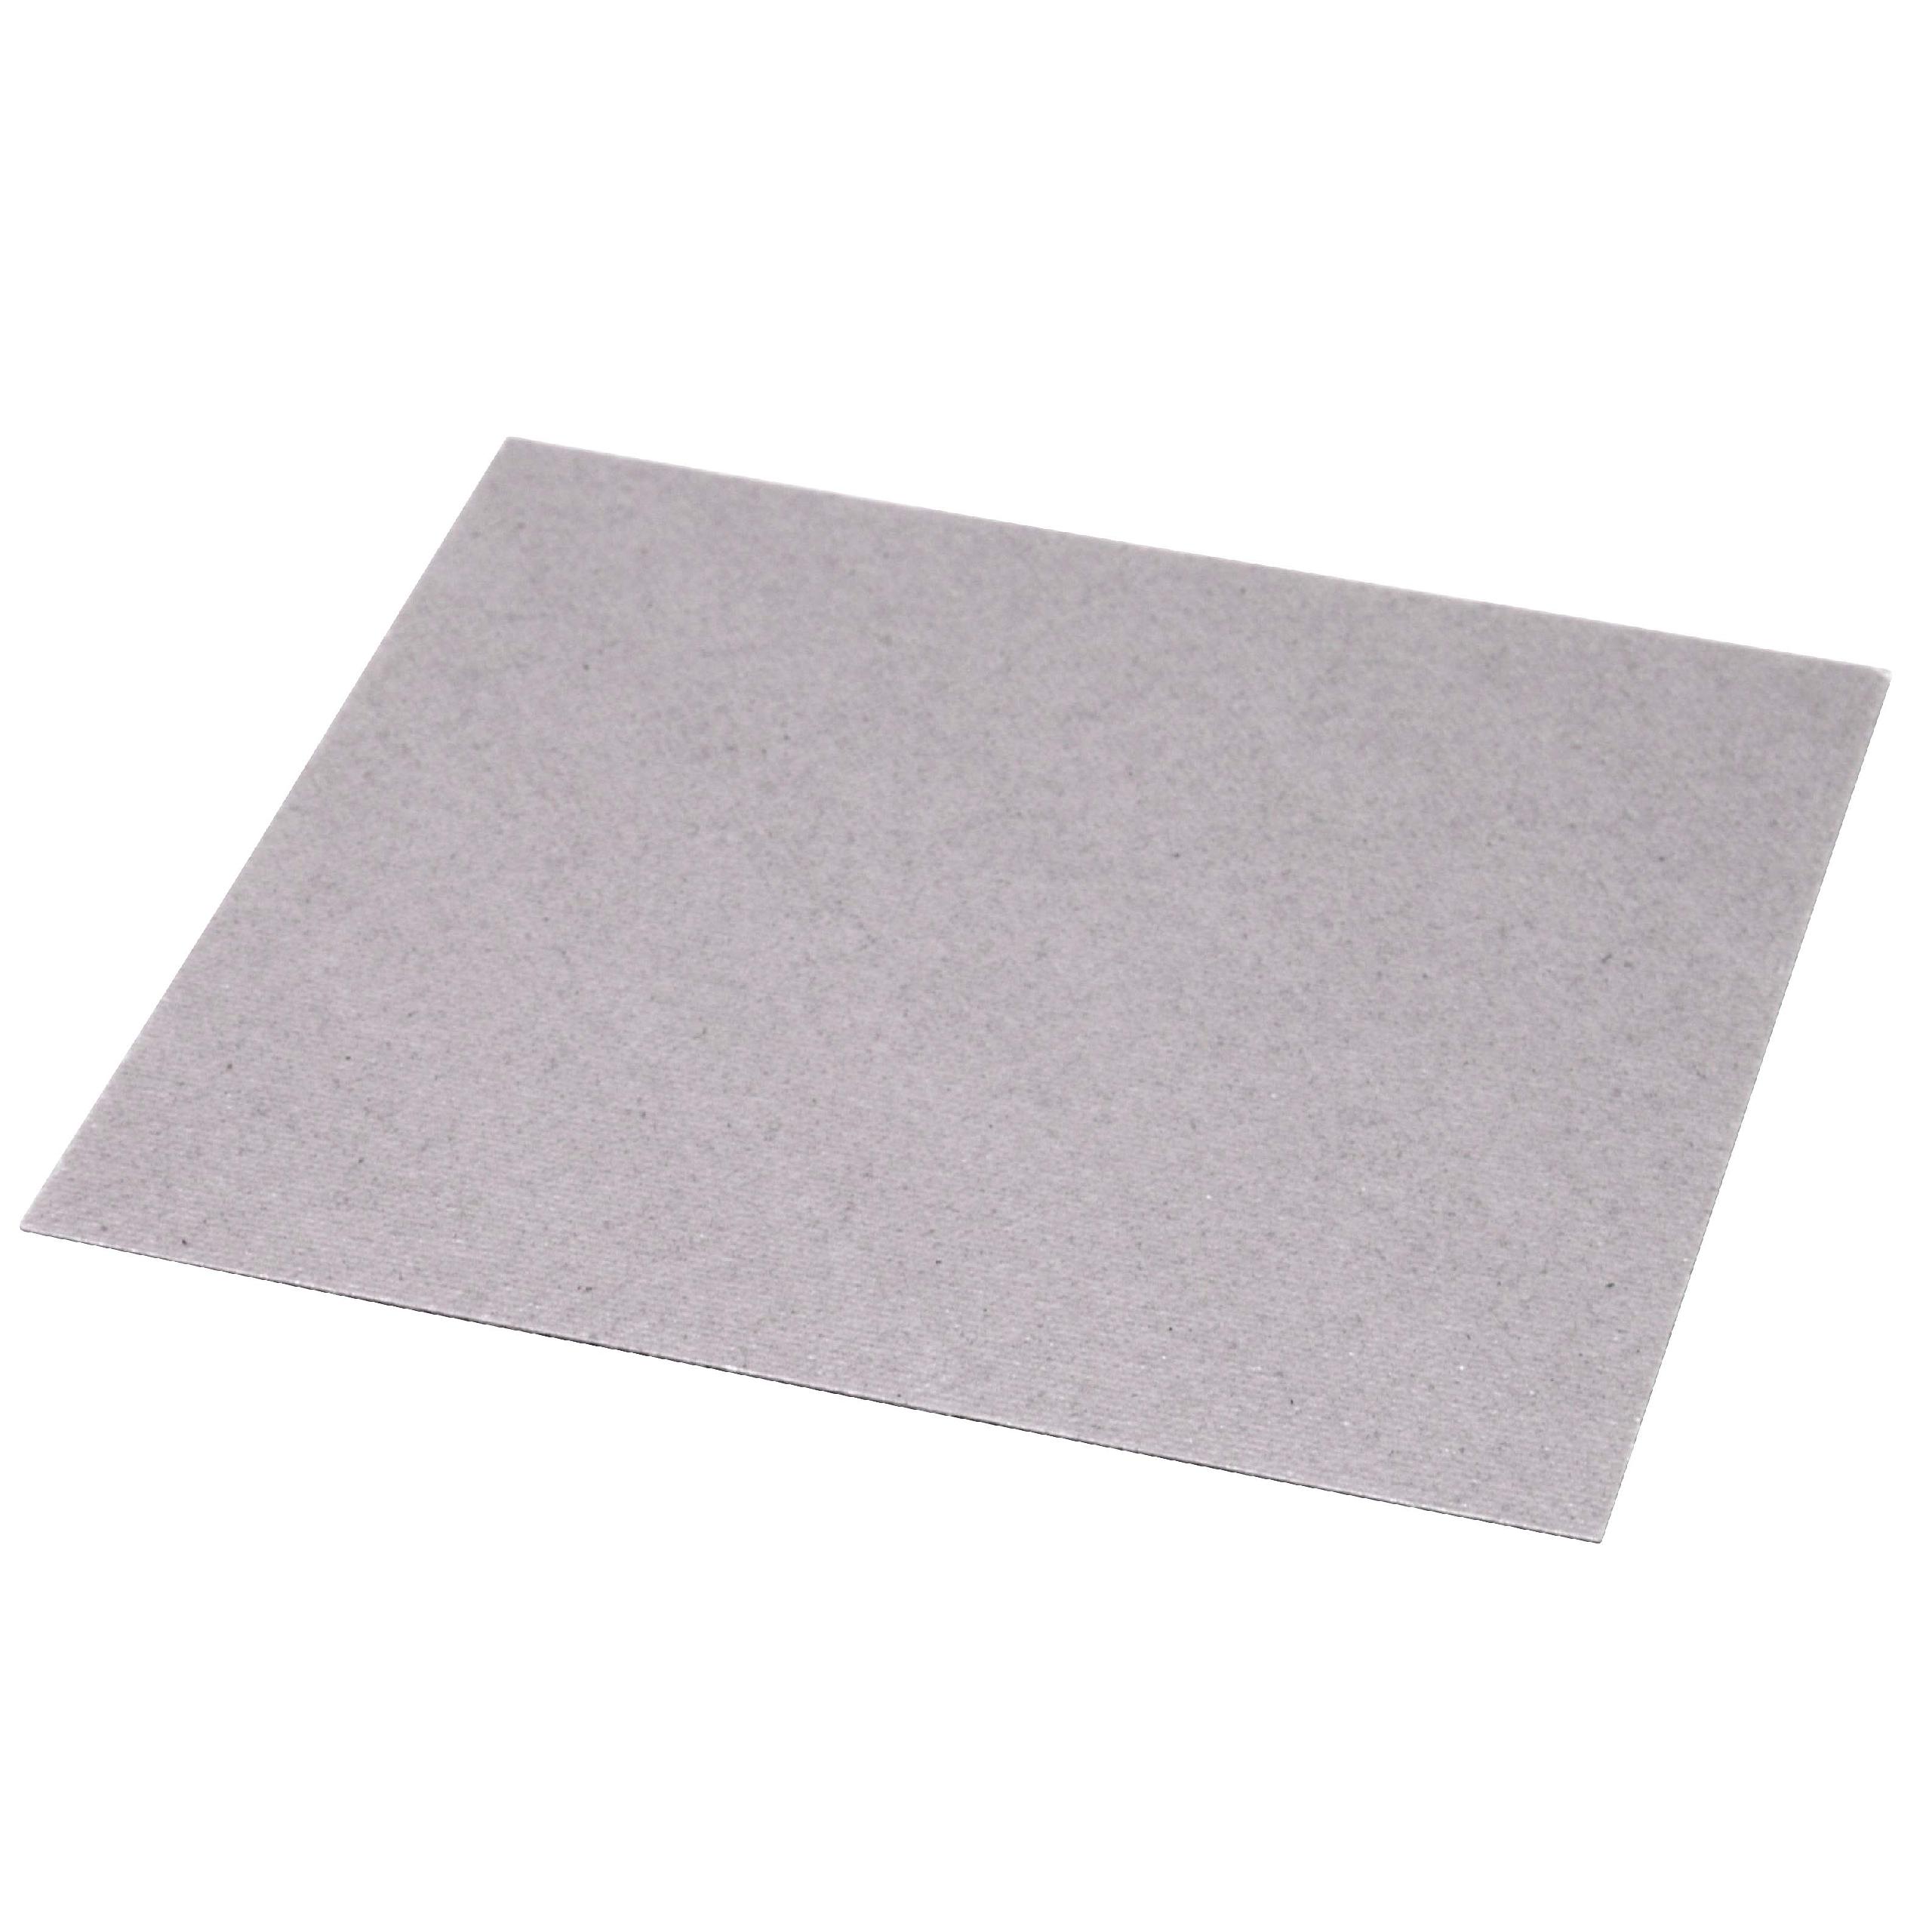 Universal Mica Plate suitable forvarious Microwave - Glimmer Disc 13.0 x 12.0 cm